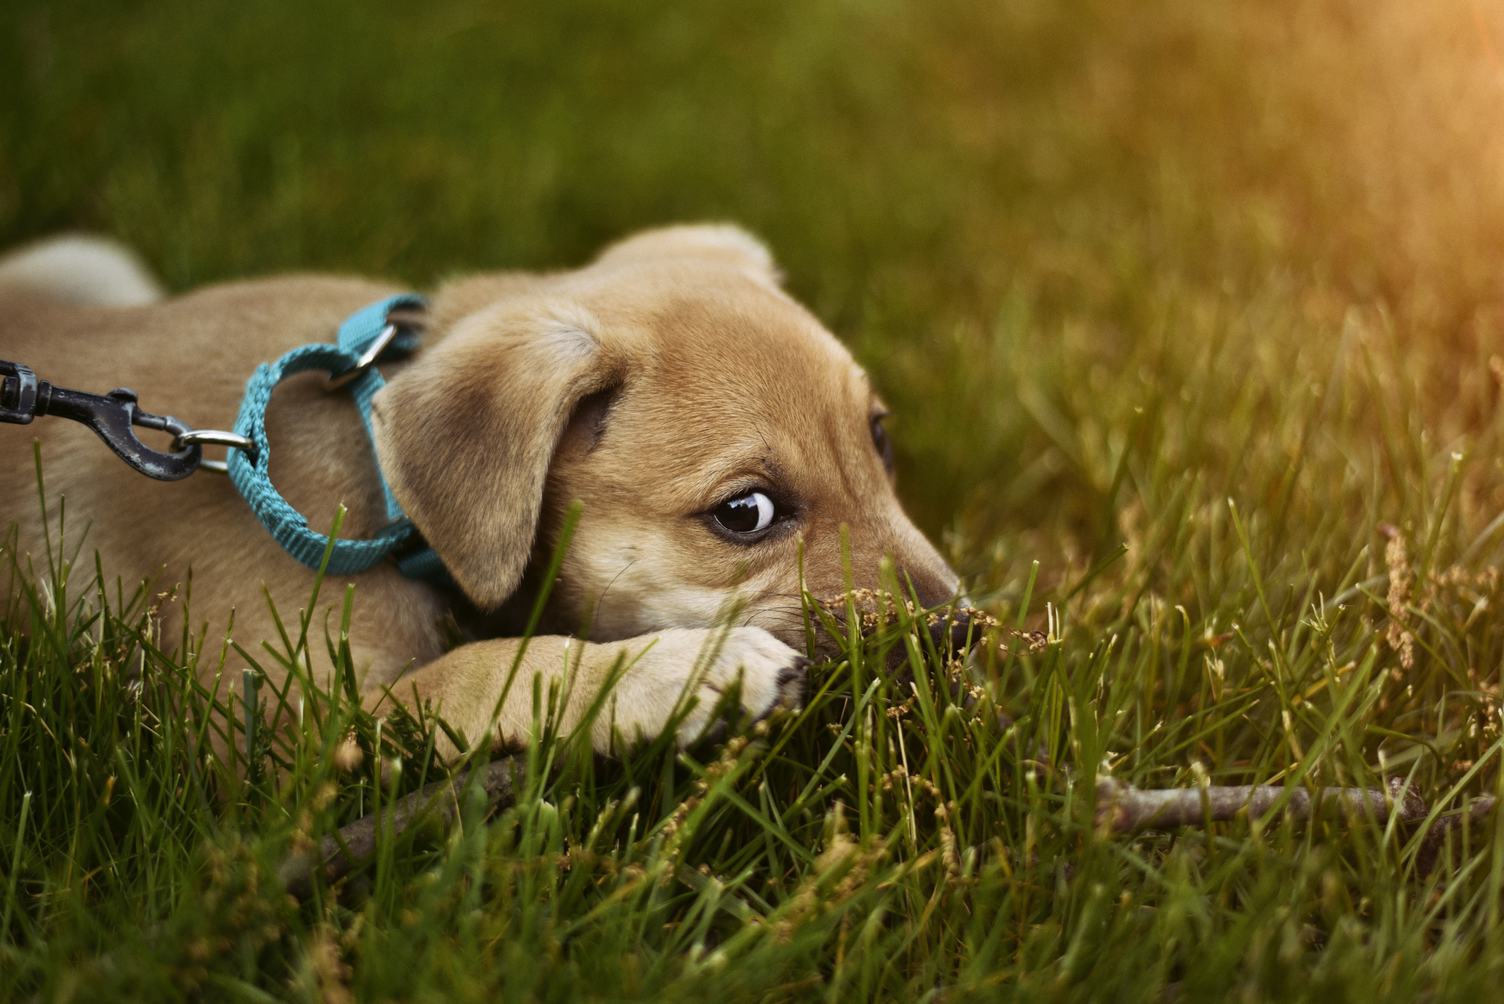 Cute Puppy Dog on the Grass